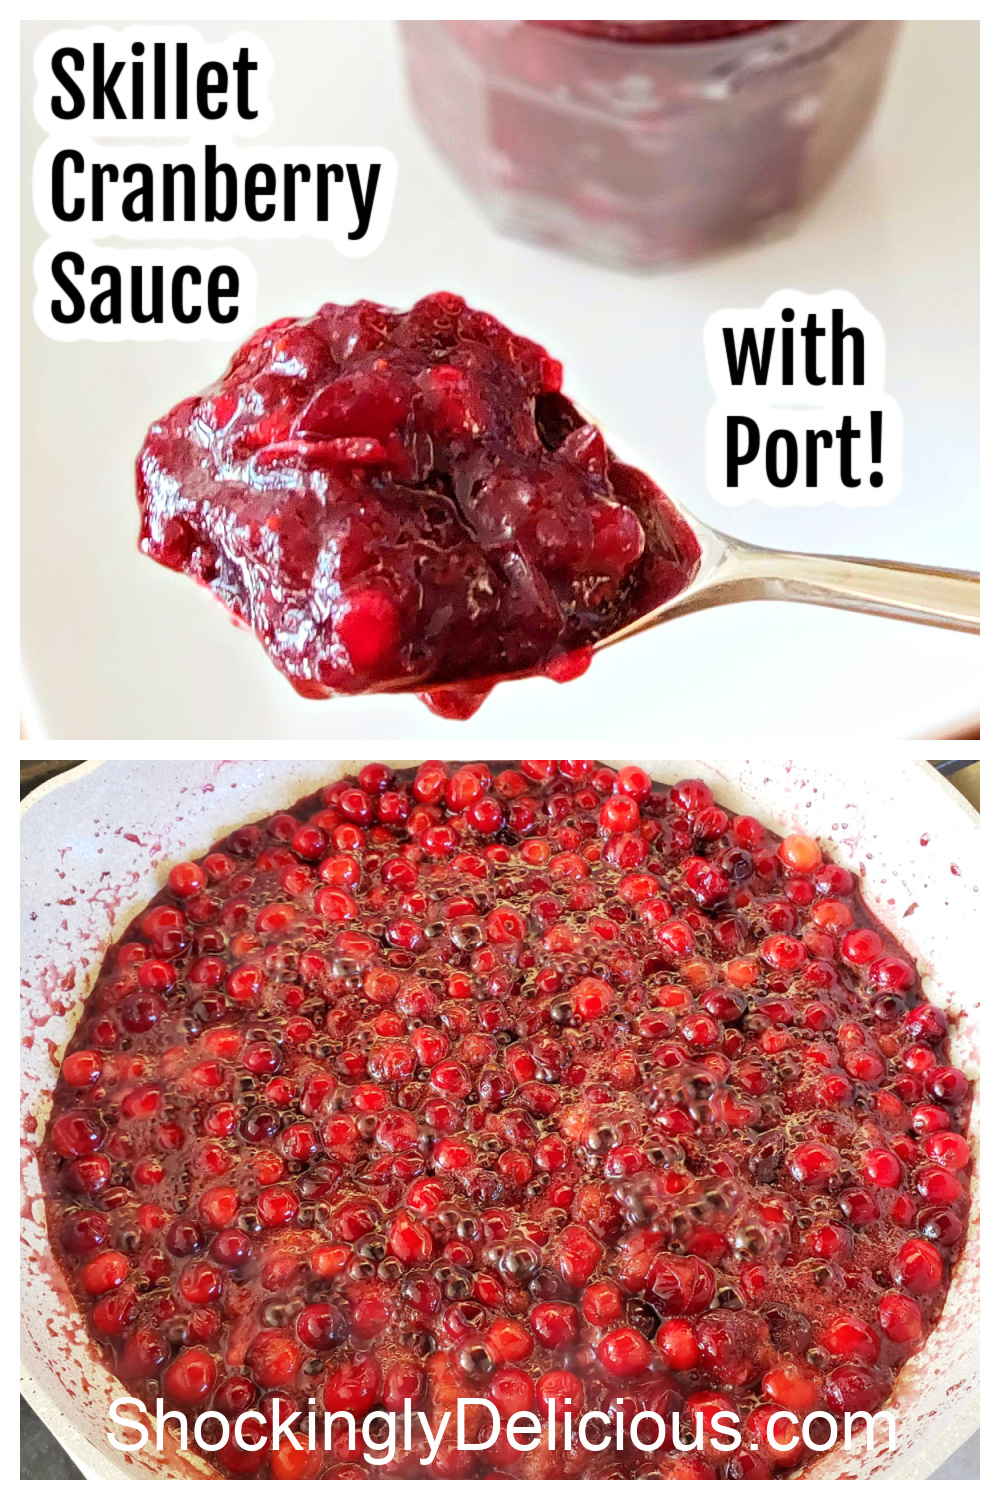 2 photos of Skillet Cranberry Sauce with Port with recipe title superimposed on top